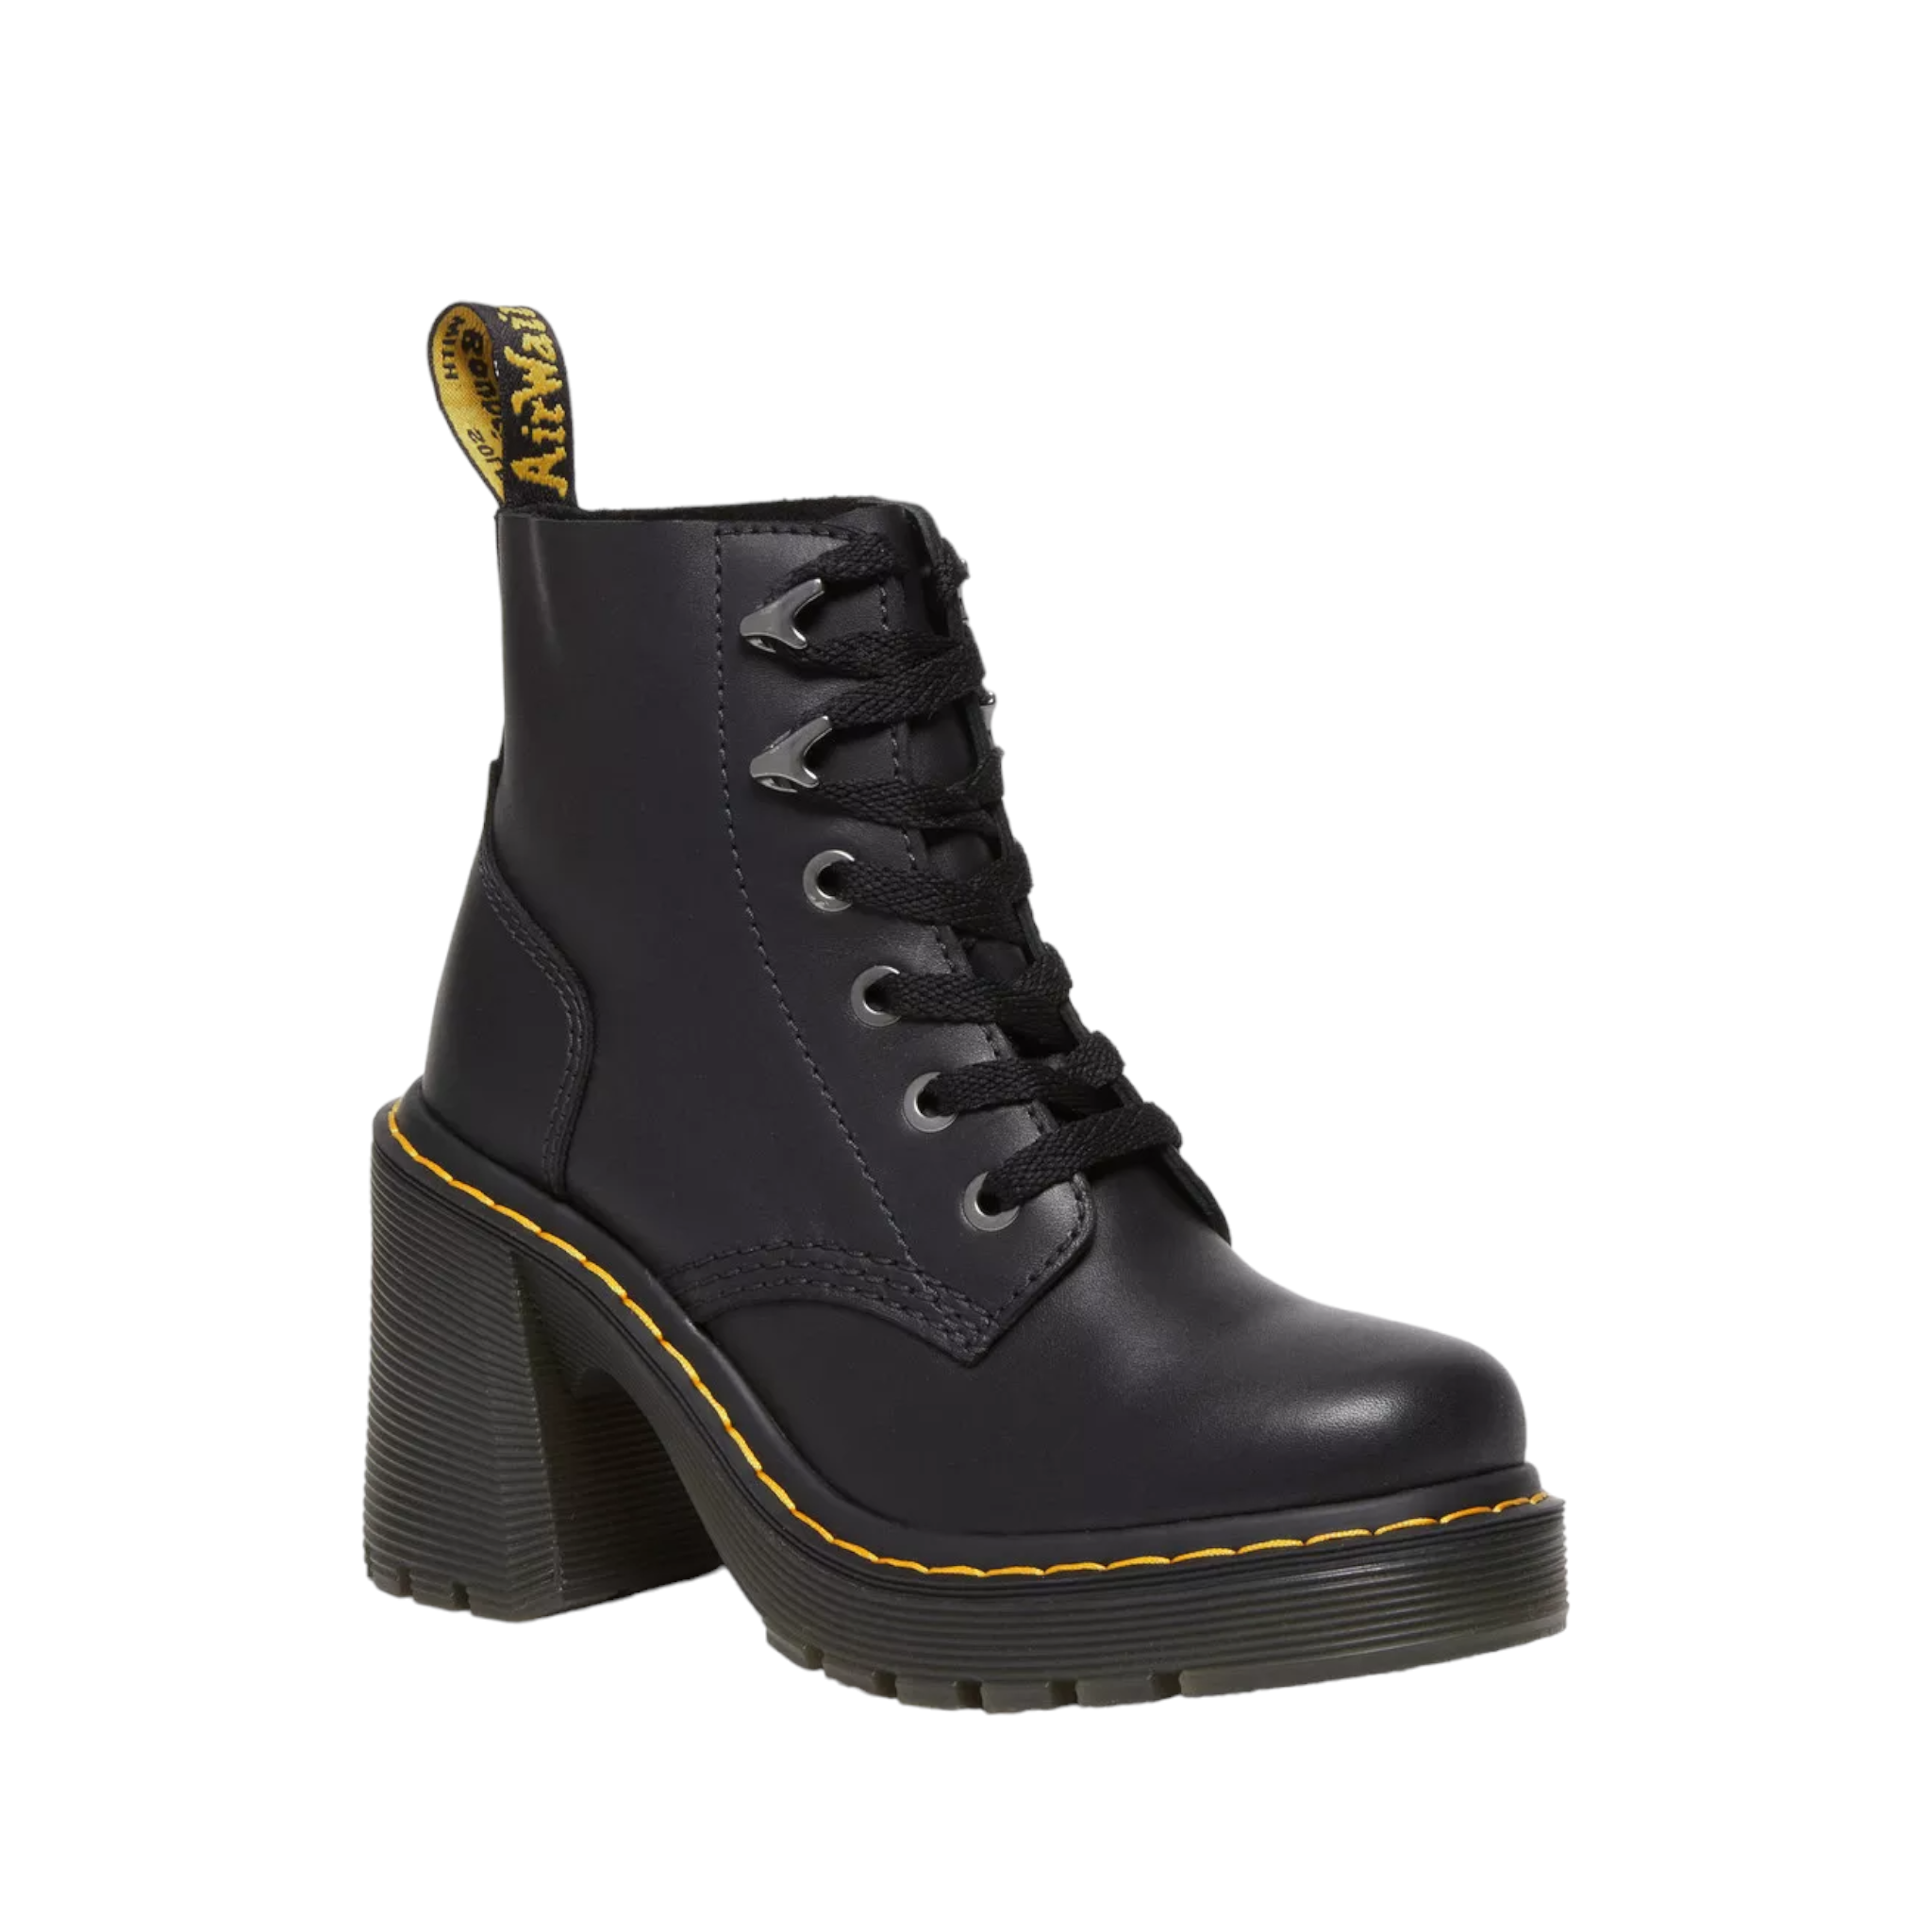 Jesy Dr. Marten Boots with heel and platform sole. Shop Online and in-store with shoe&me Mount Maunganui. Iconic yellow Stitch with unique eyelets and pull-tab.